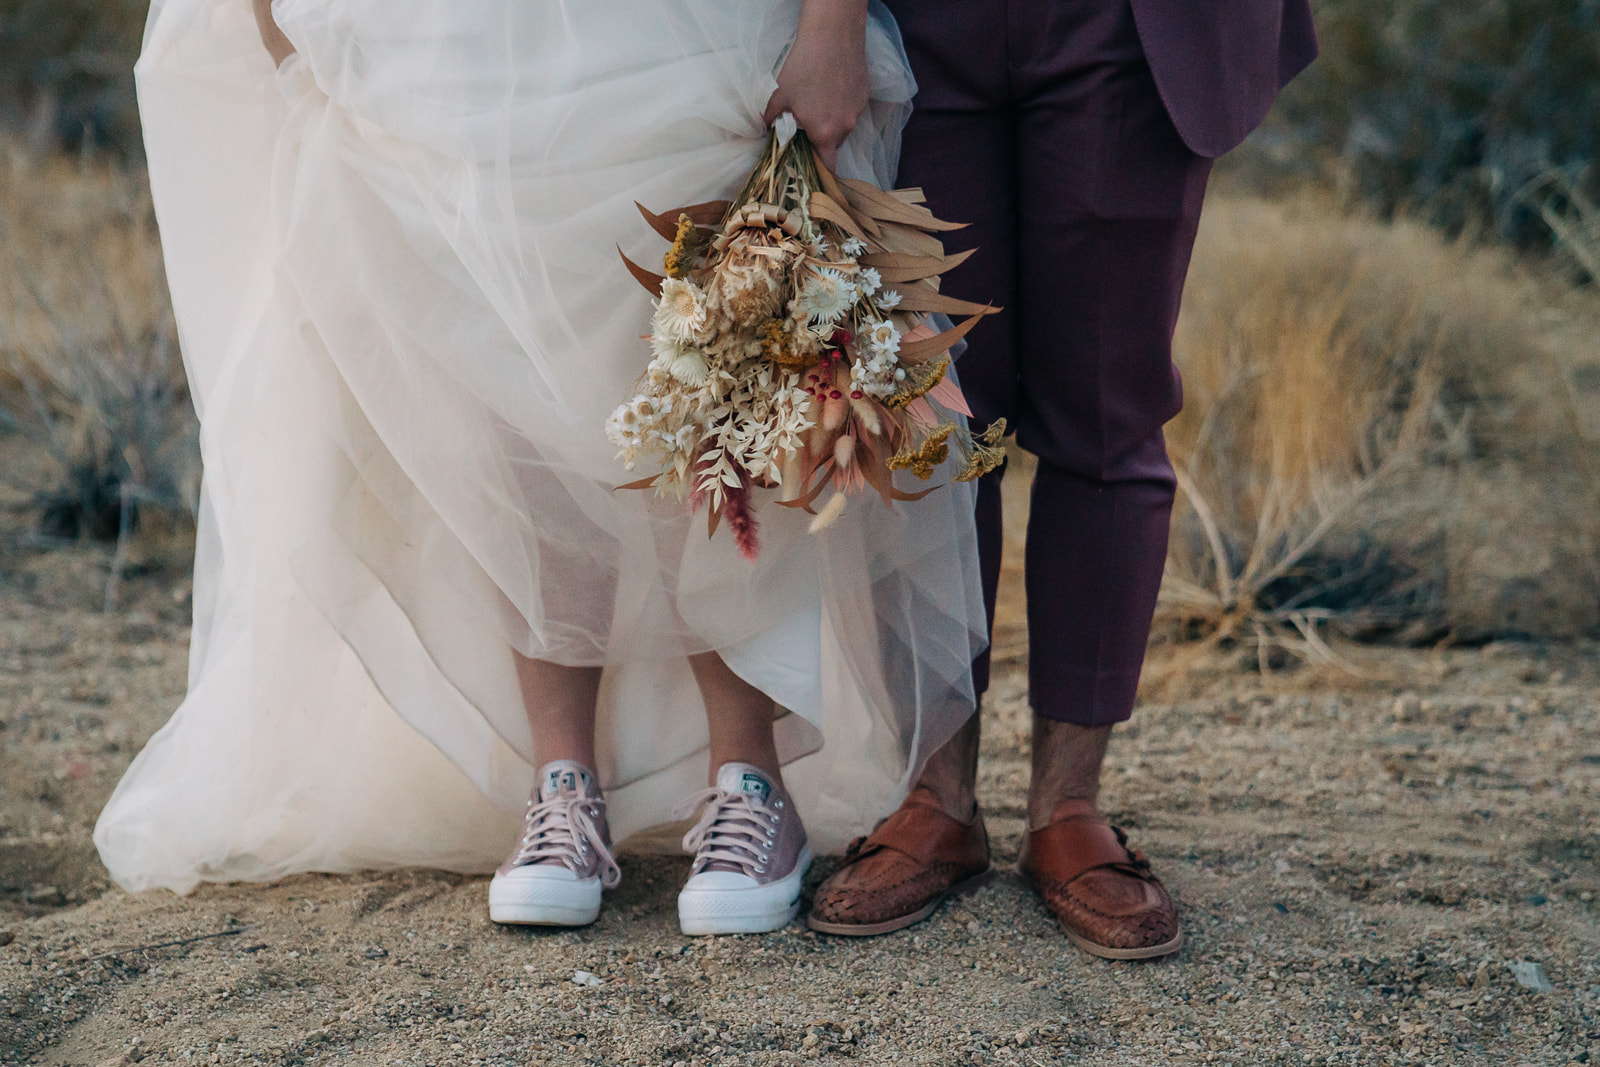 Bride and groom's shoes in the desert